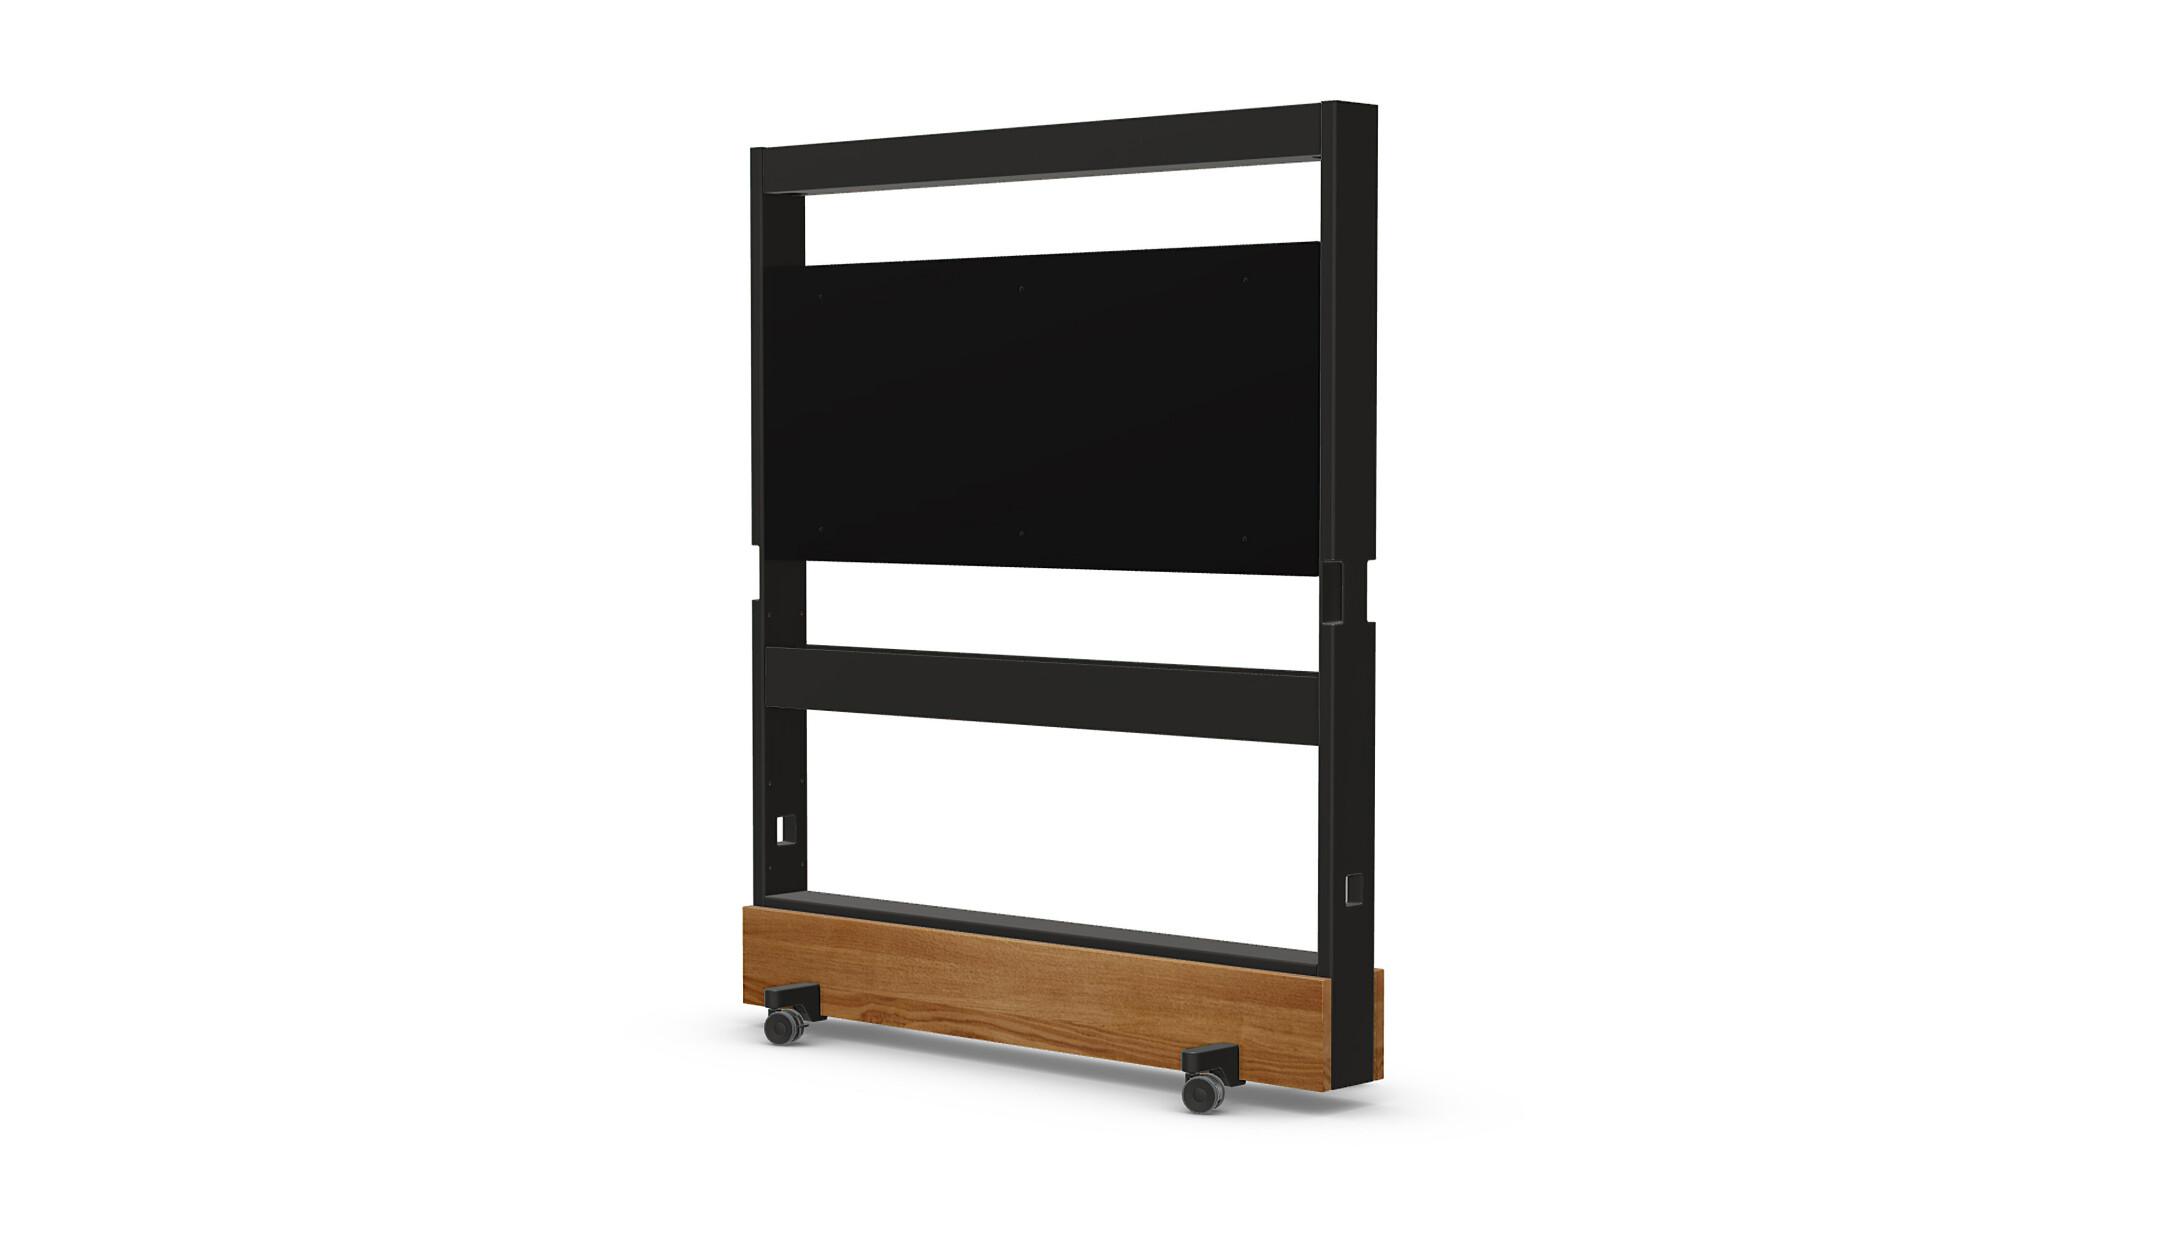 Vitra-Dancing-Wall-Mobile-Presentation-Touch-Set-mit-Touch-Display-Basic-Dark-Eiche-natur